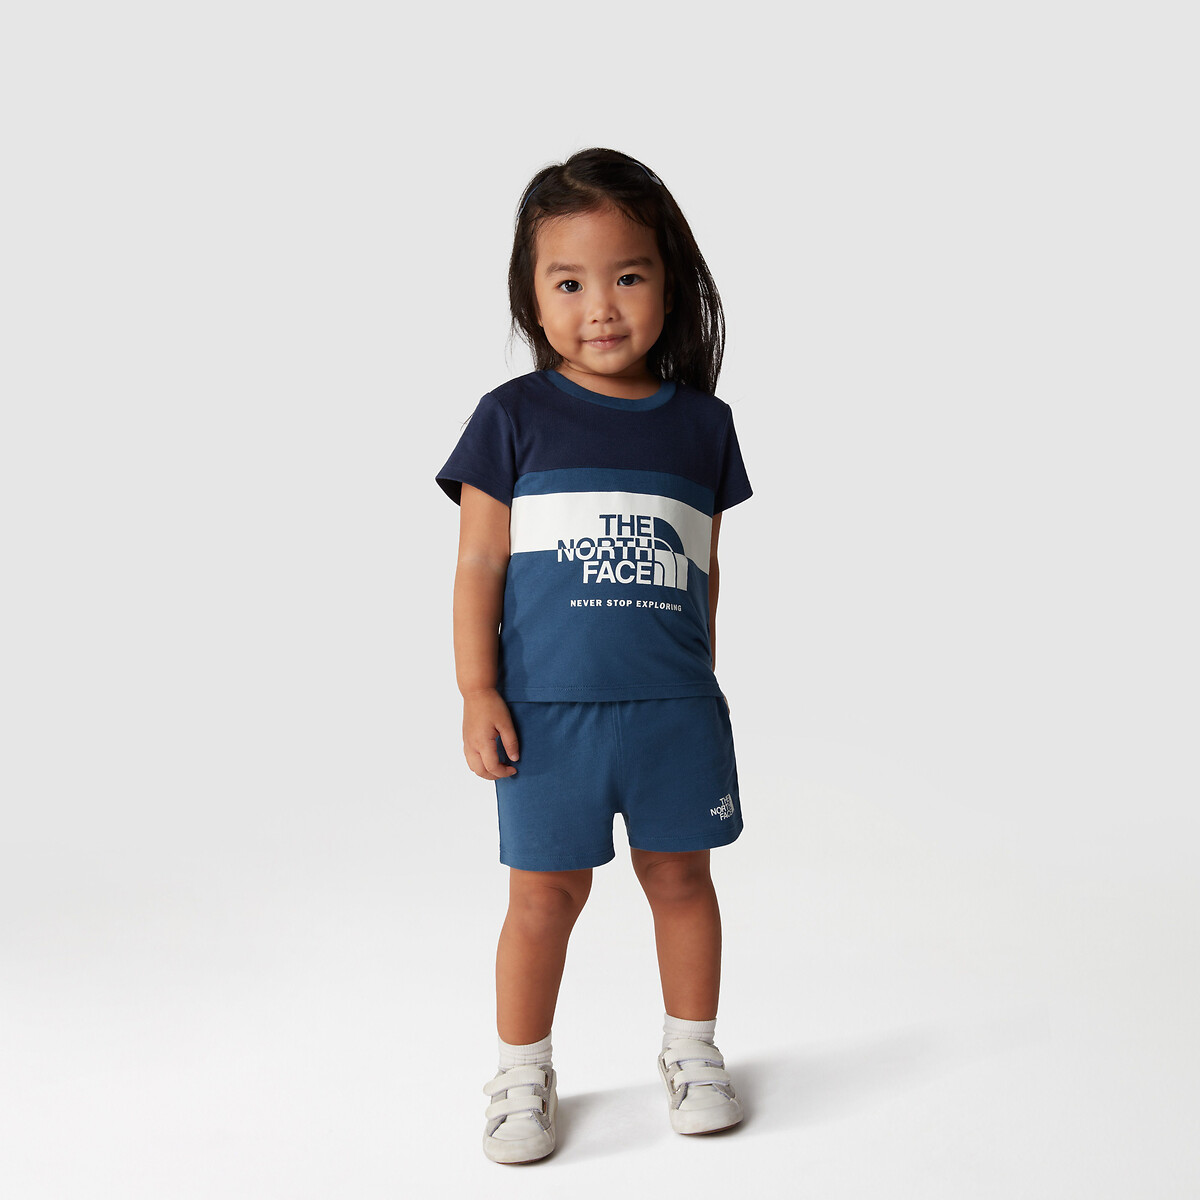 Image of Cotton Shorts/T-Shirt Outfit